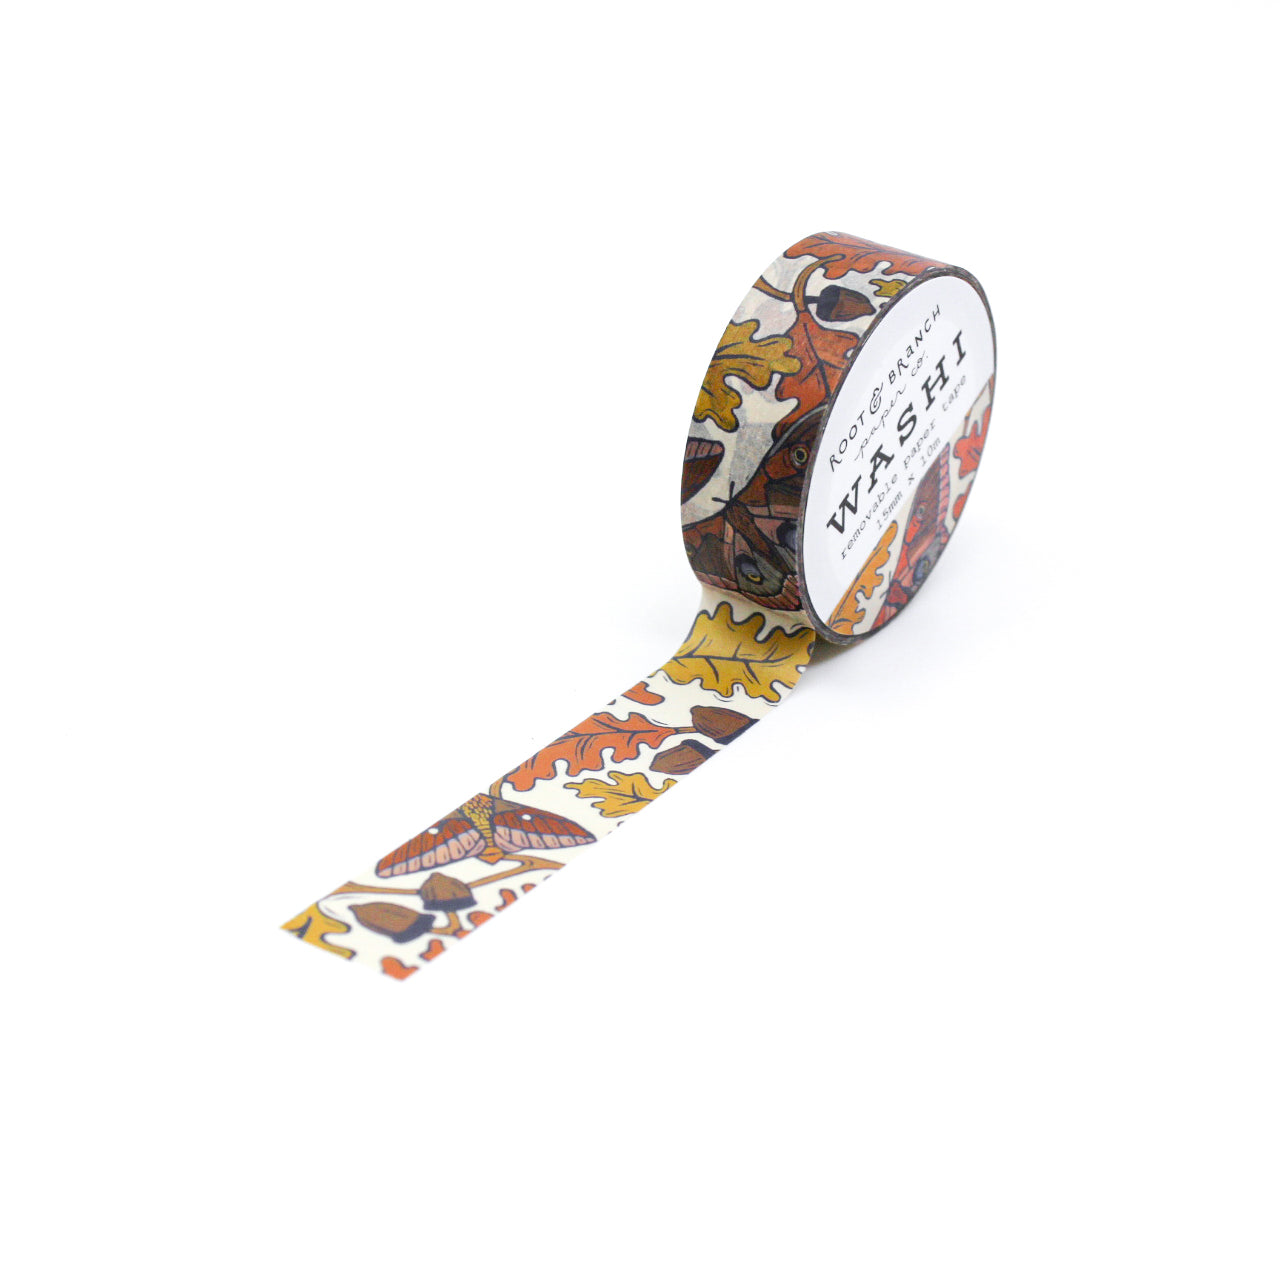 White Oak Autumn Butterflies Washi Tape, a captivating design with delicate butterflies amidst the colors of fall leaves, perfect for seasonal crafting. This washi is from Root & Branch Paper Co. and sold at BBB Supplies Craft Shop.